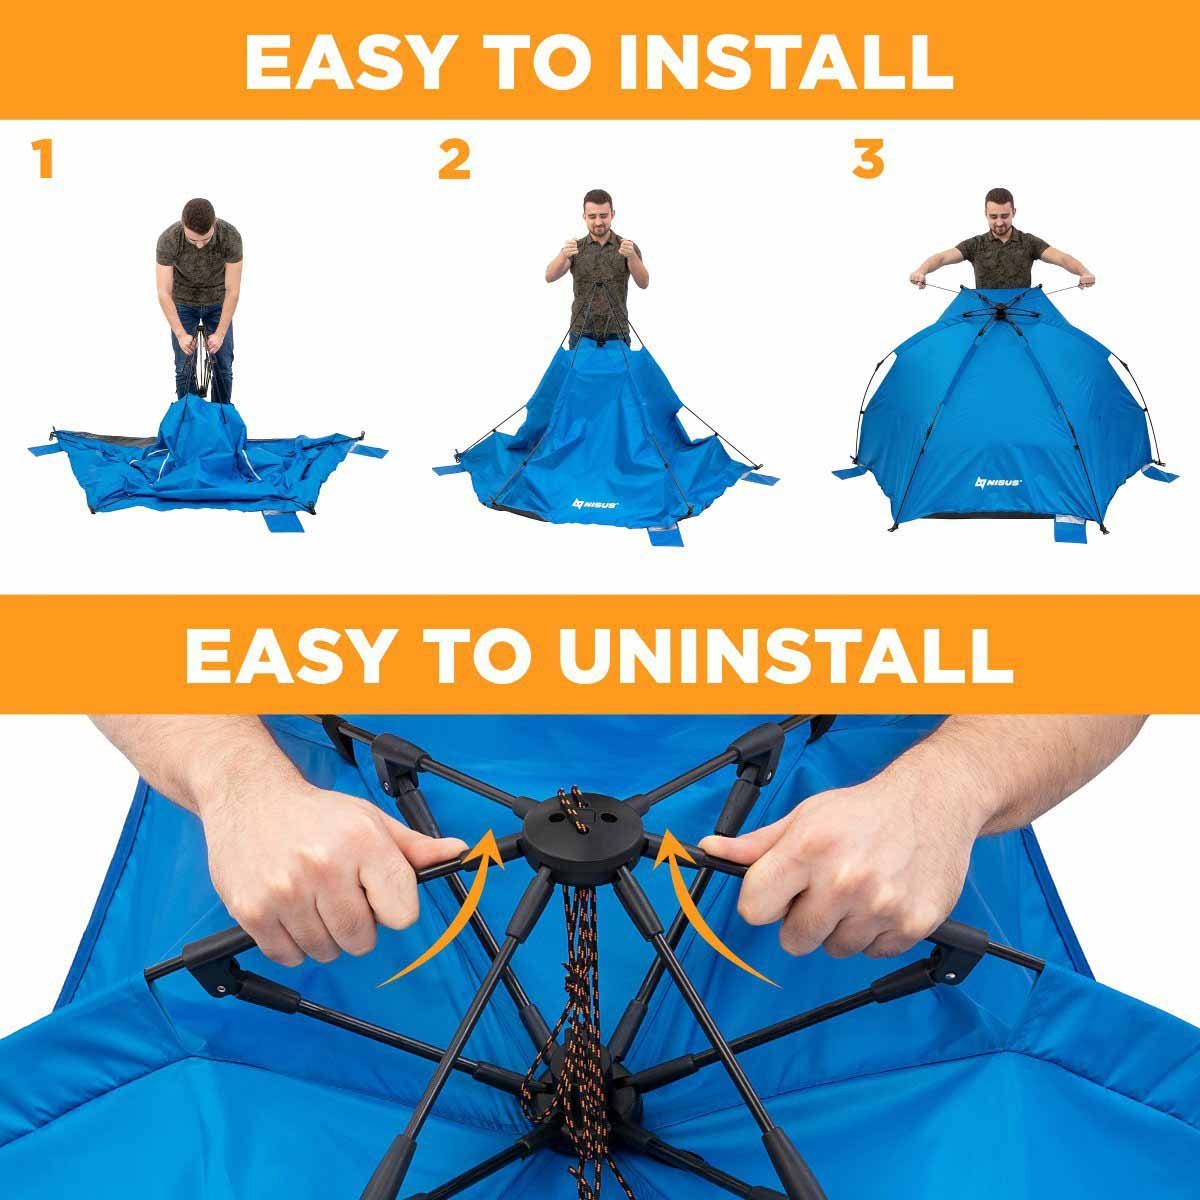 4 Person Large Easy Up Beach Tent Sun Shade Shelter is easy both to install and uninstall